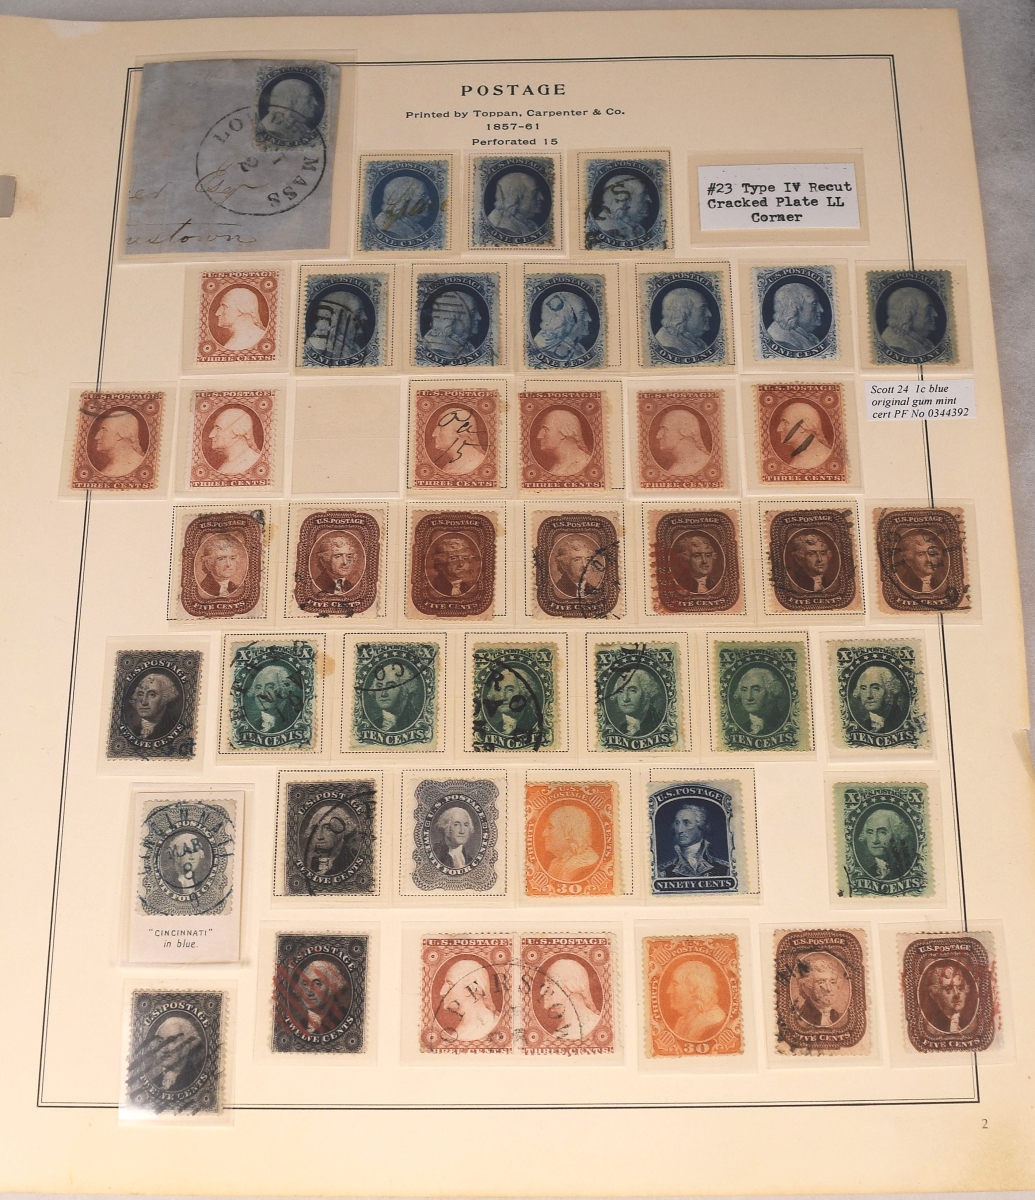 The stamps in the collection were selected for condition and with an eye toward completing a particular issue. This Scott’s album page with 43 stamps issued between 1857 and 1861 earned $4,560, the highest price for a single page.